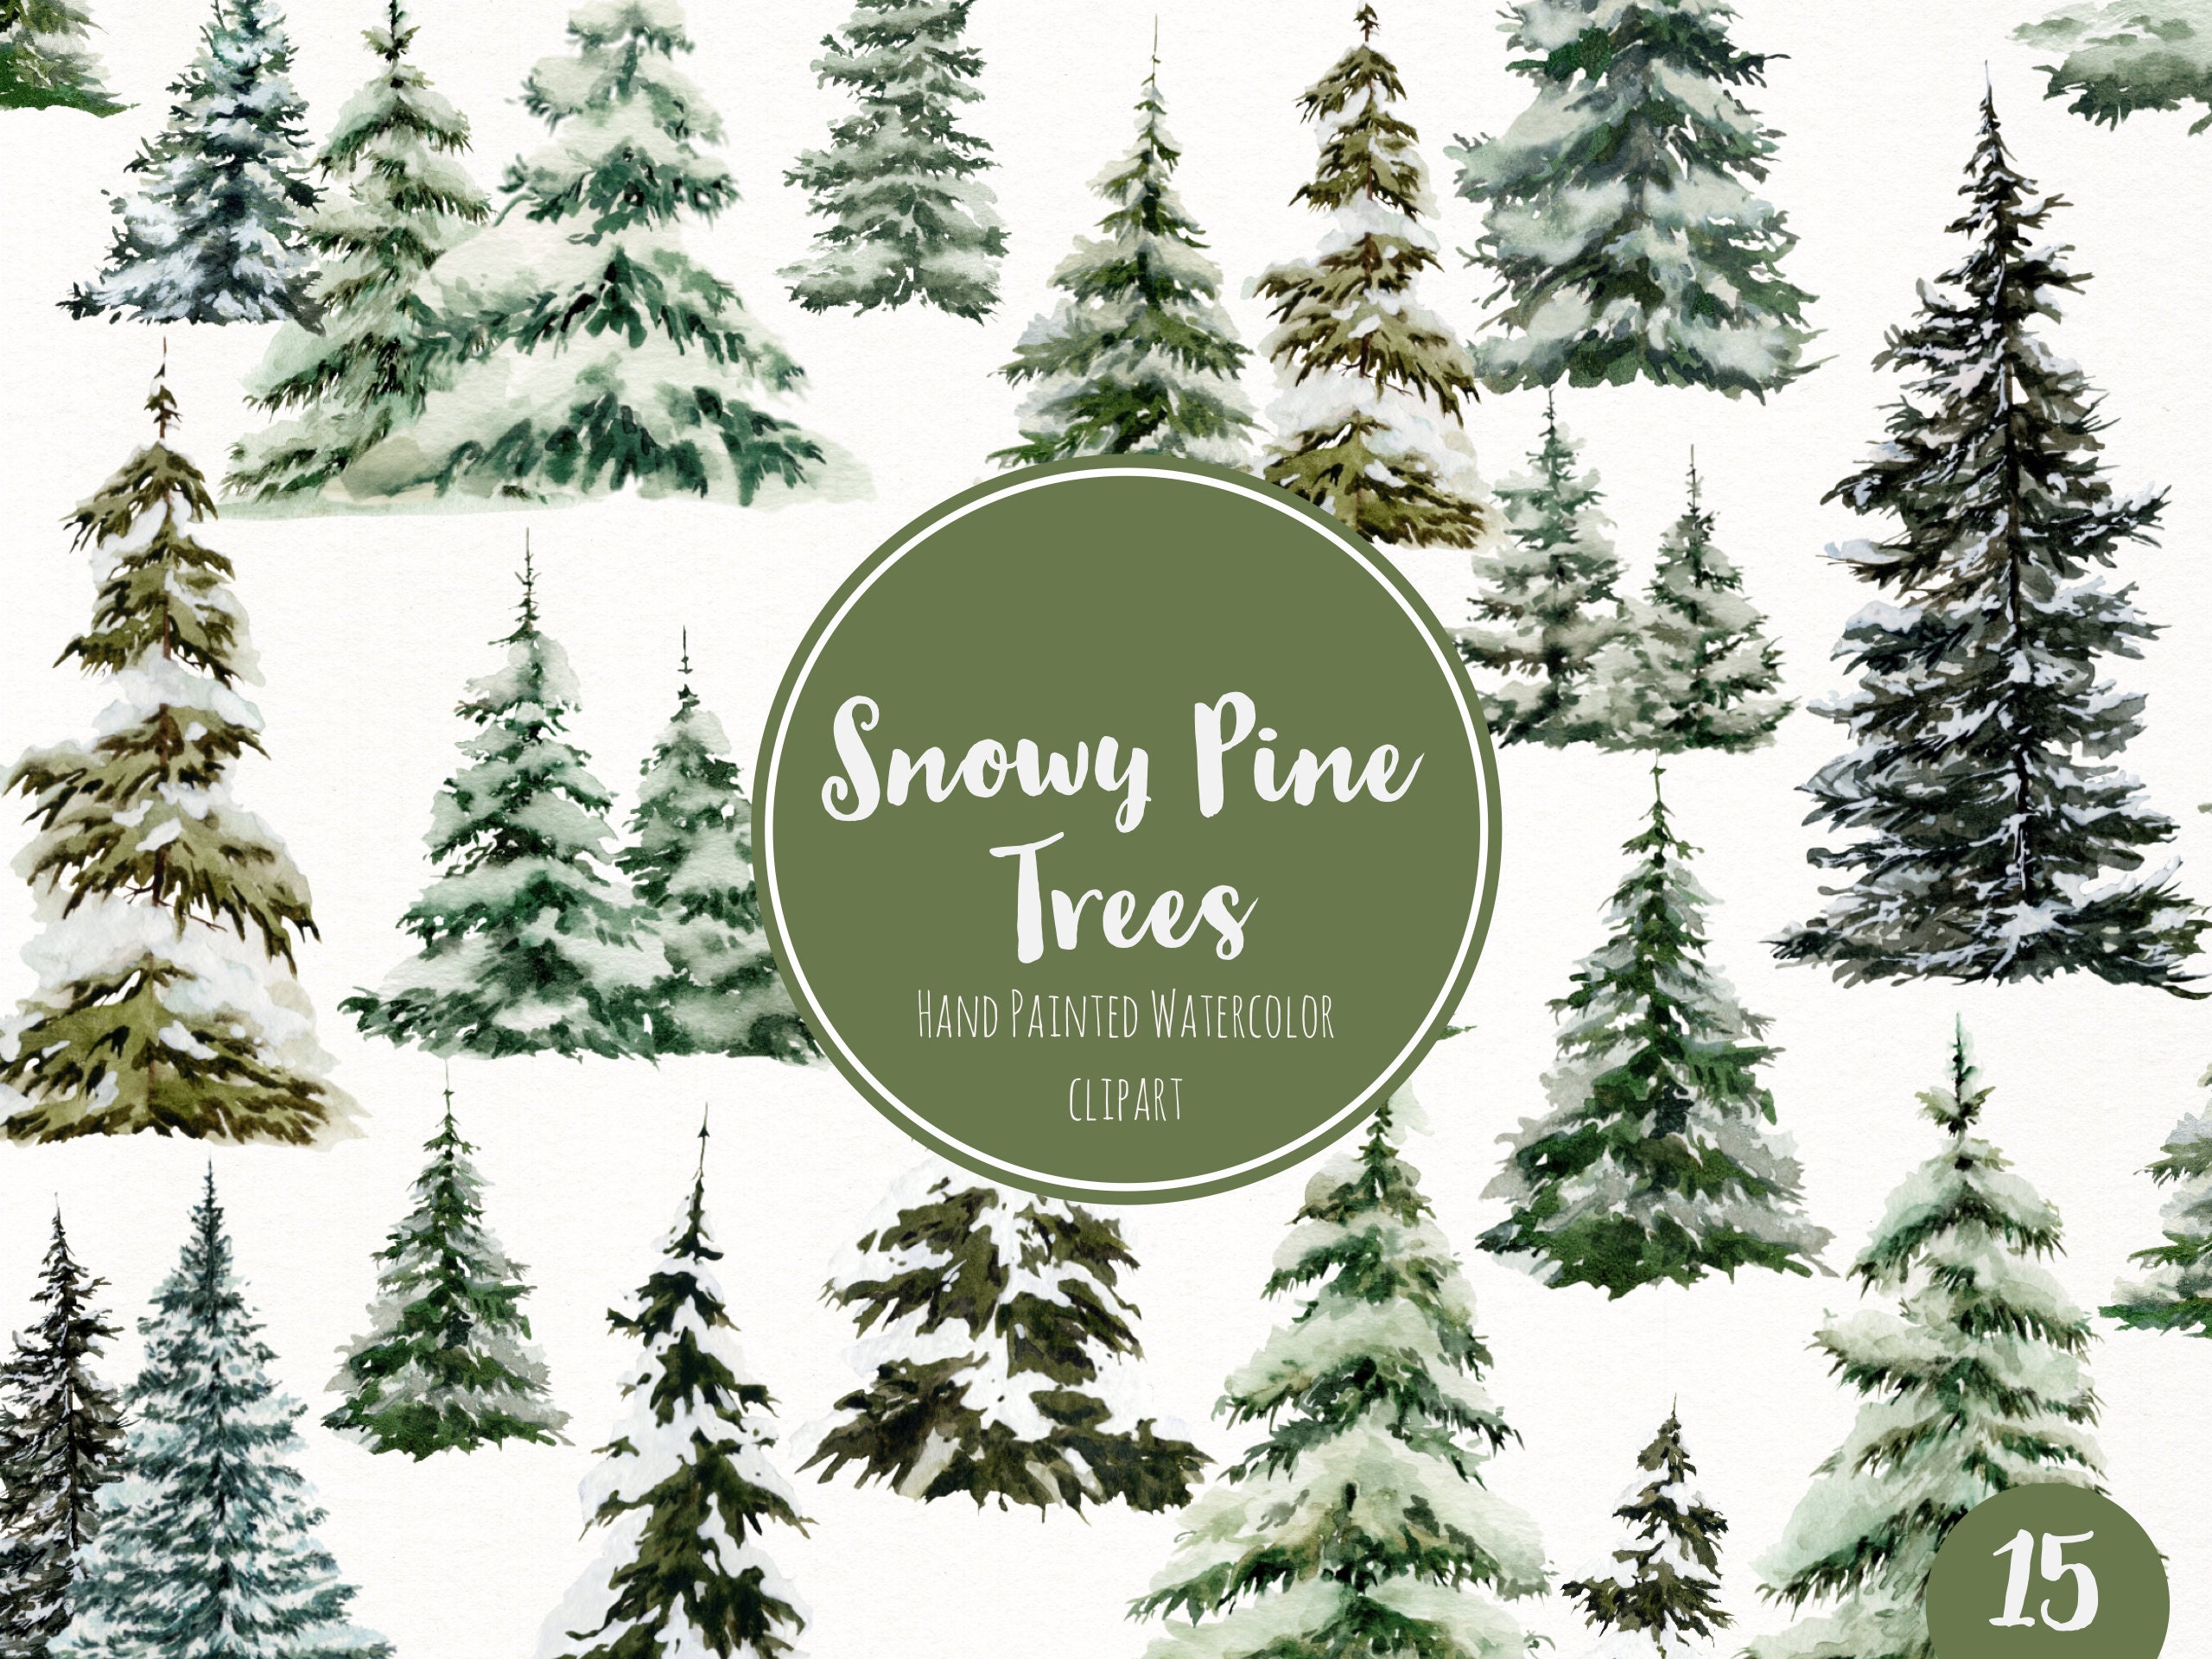 How to use oils in a sketchbook + Snowy Tree Study